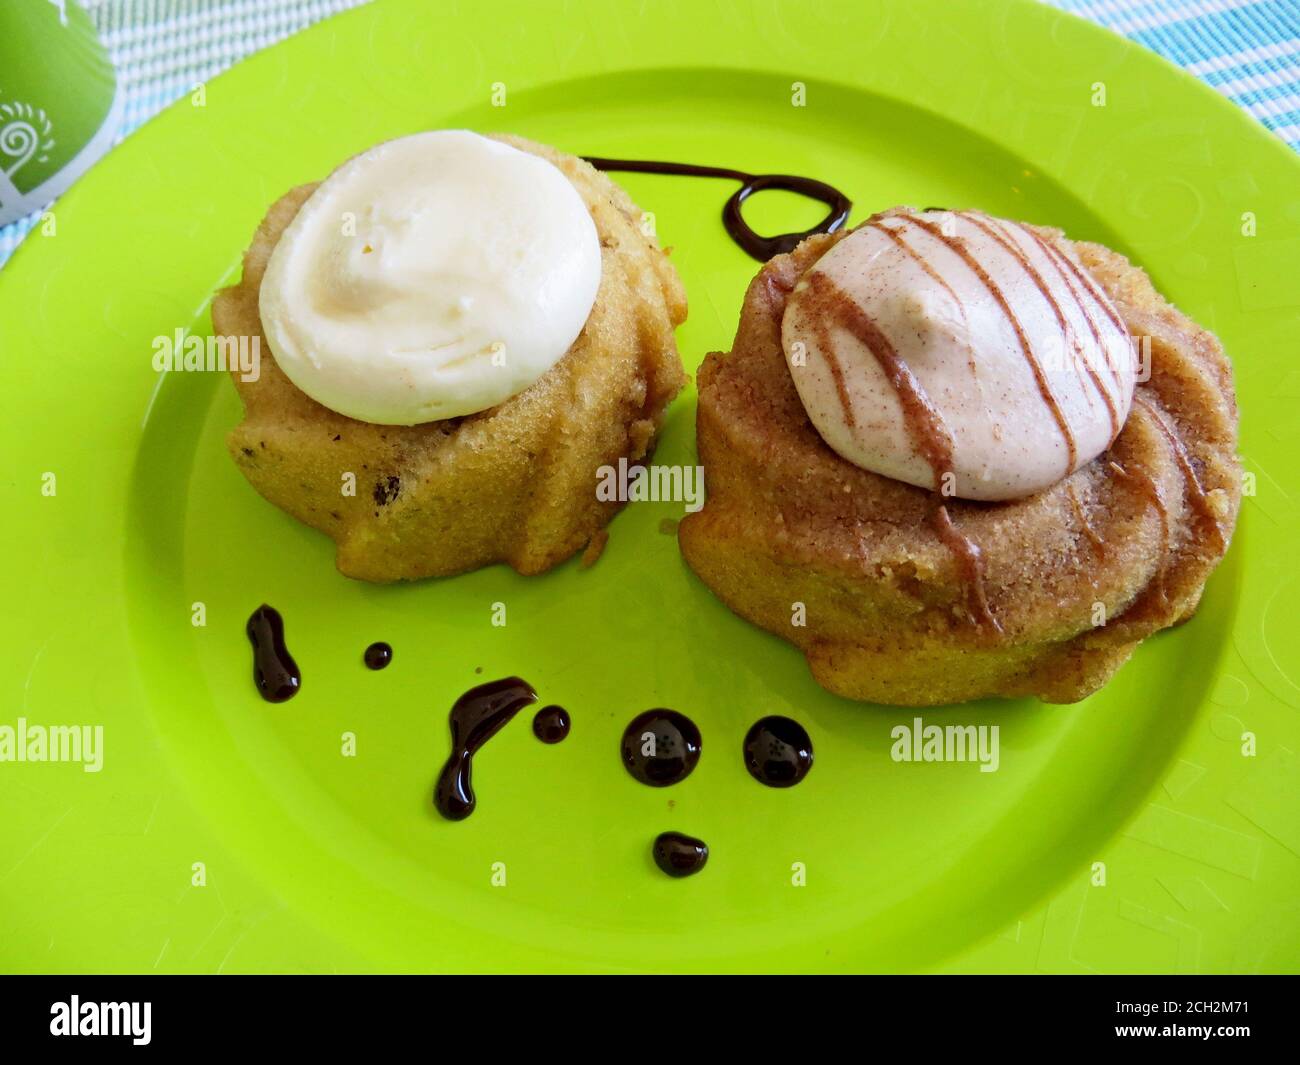 Small cakes  with frosting on a plate Stock Photo